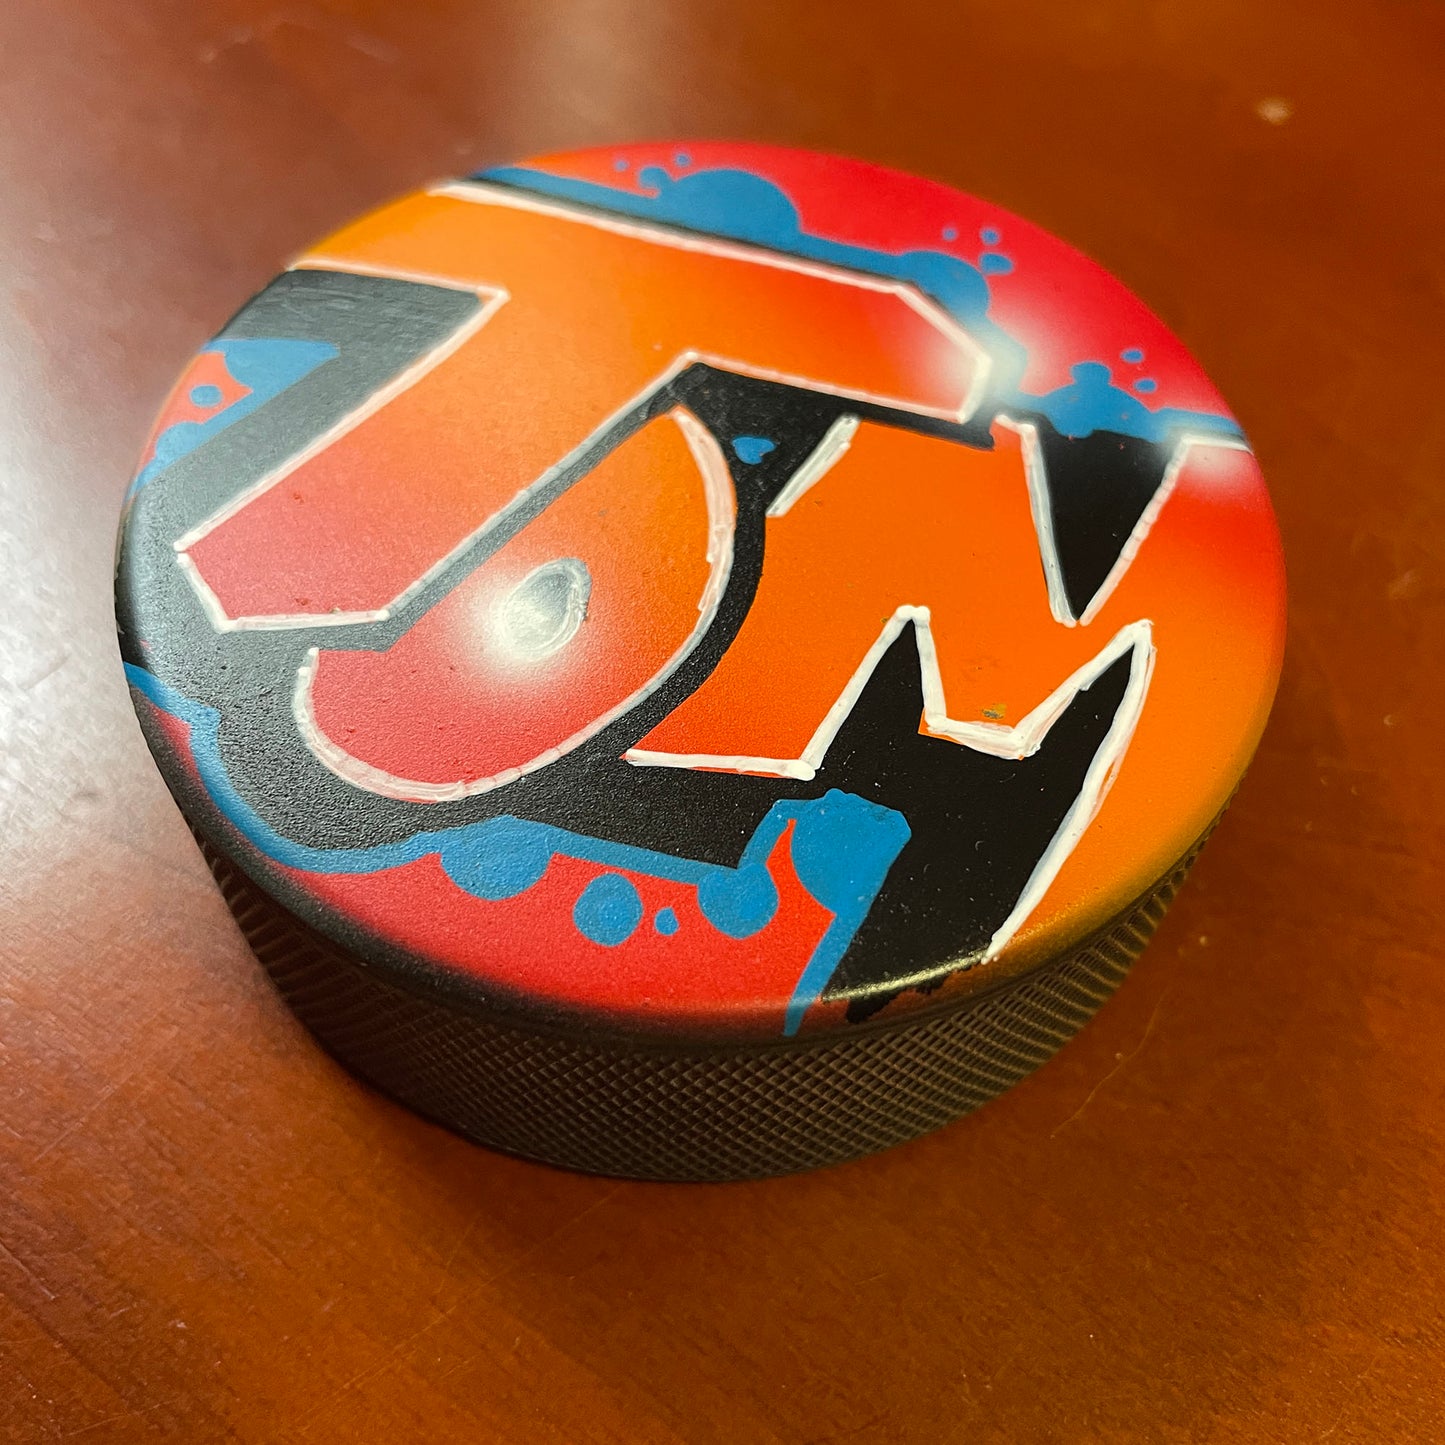 Personalized Hockey Puck with Name in Graffiti